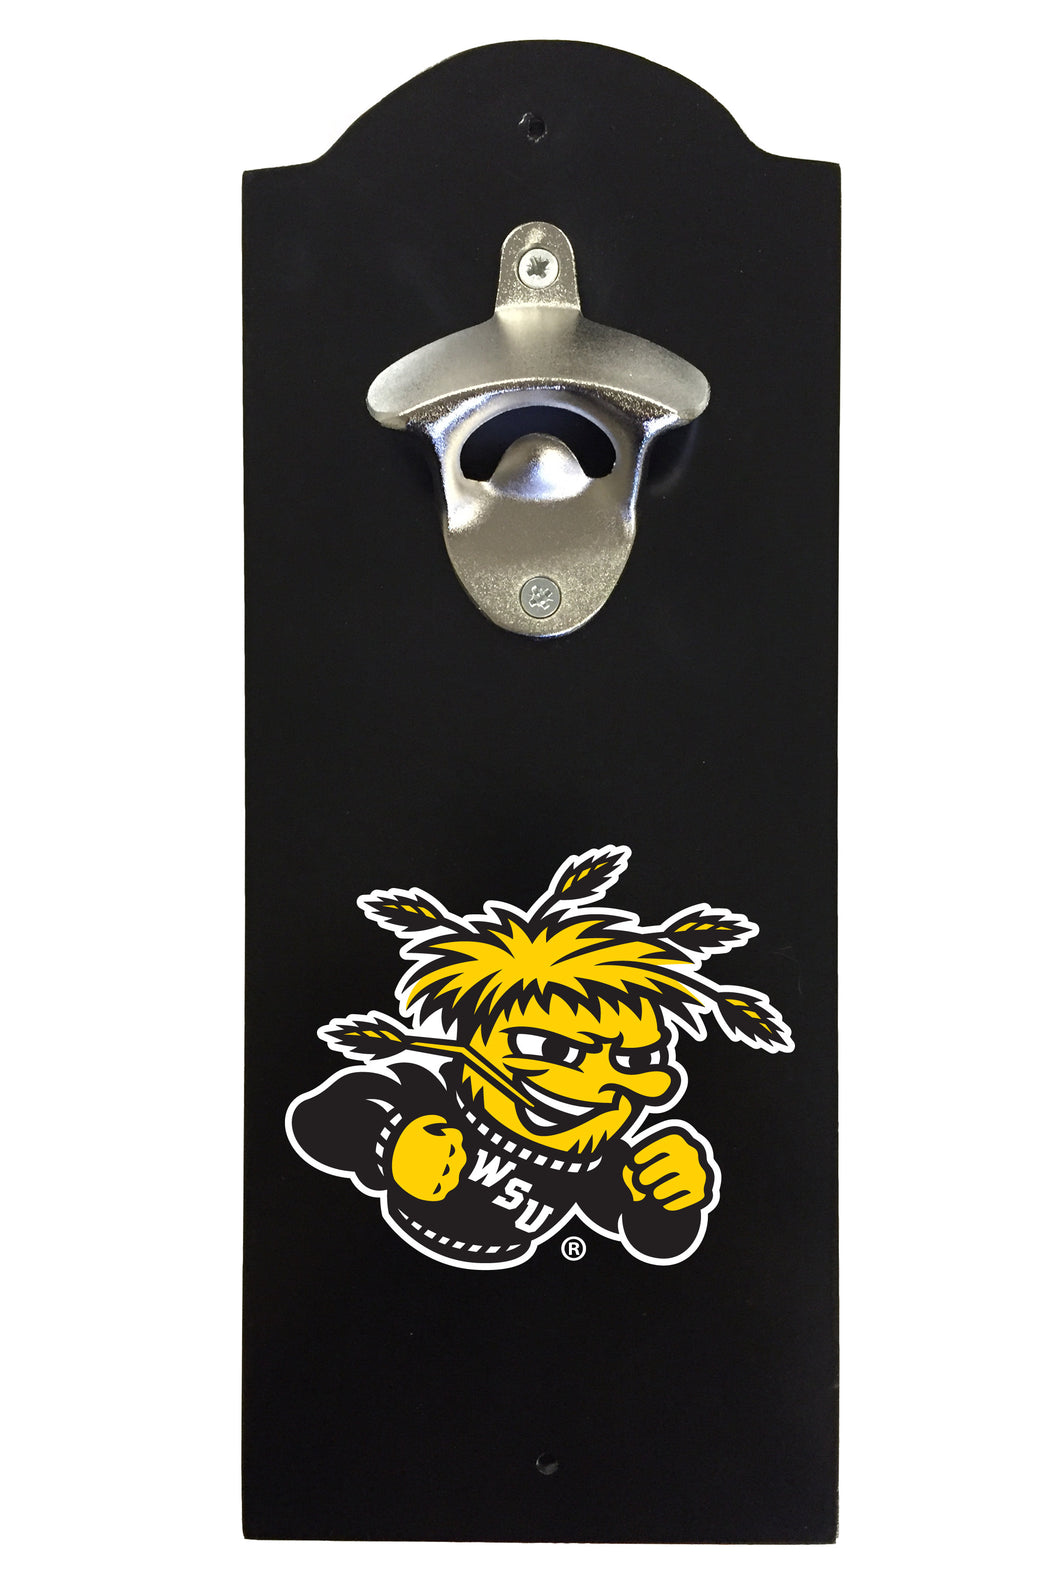 Wichita State Shockers Wall-Mounted Bottle Opener – Sturdy Metal with Decorative Wood Base for Home Bars, Rec Rooms & Fan Caves